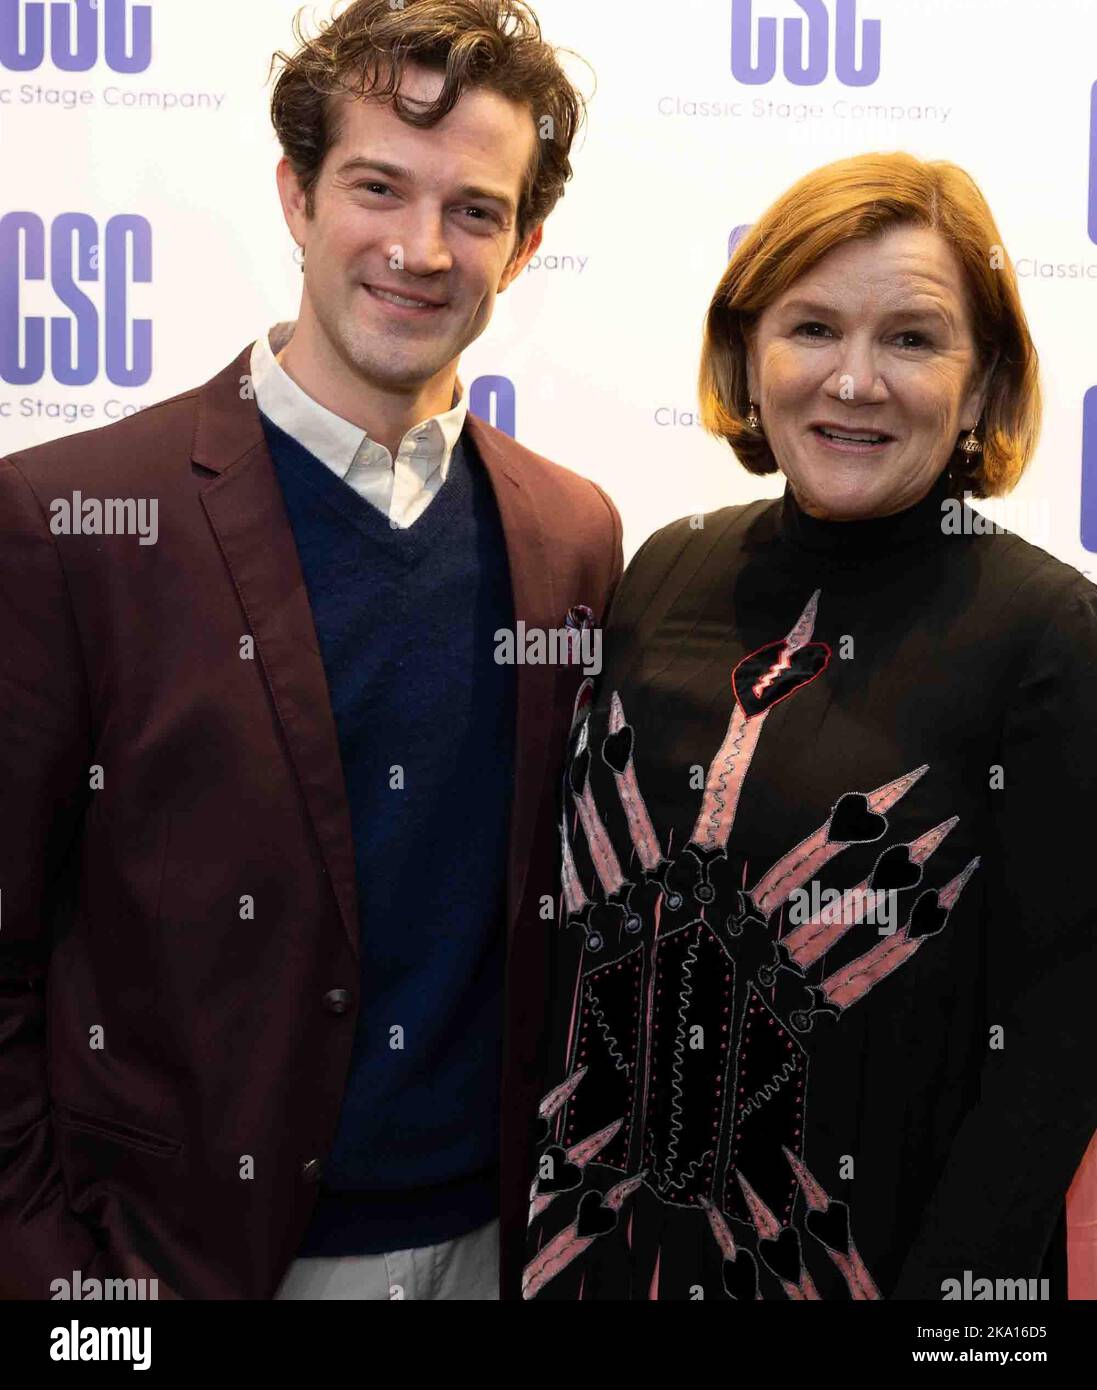 New York, NY, USA. 30th Oct, 2022. A.J. Shively, Mare Winningham in attendance for A MAN OF NO IMPORTANCE Opening Night on Broadway, Classic Stage Company, New York, NY October 30, 2022. Credit: Manoli Figetakis/Everett Collection/Alamy Live News Stock Photo